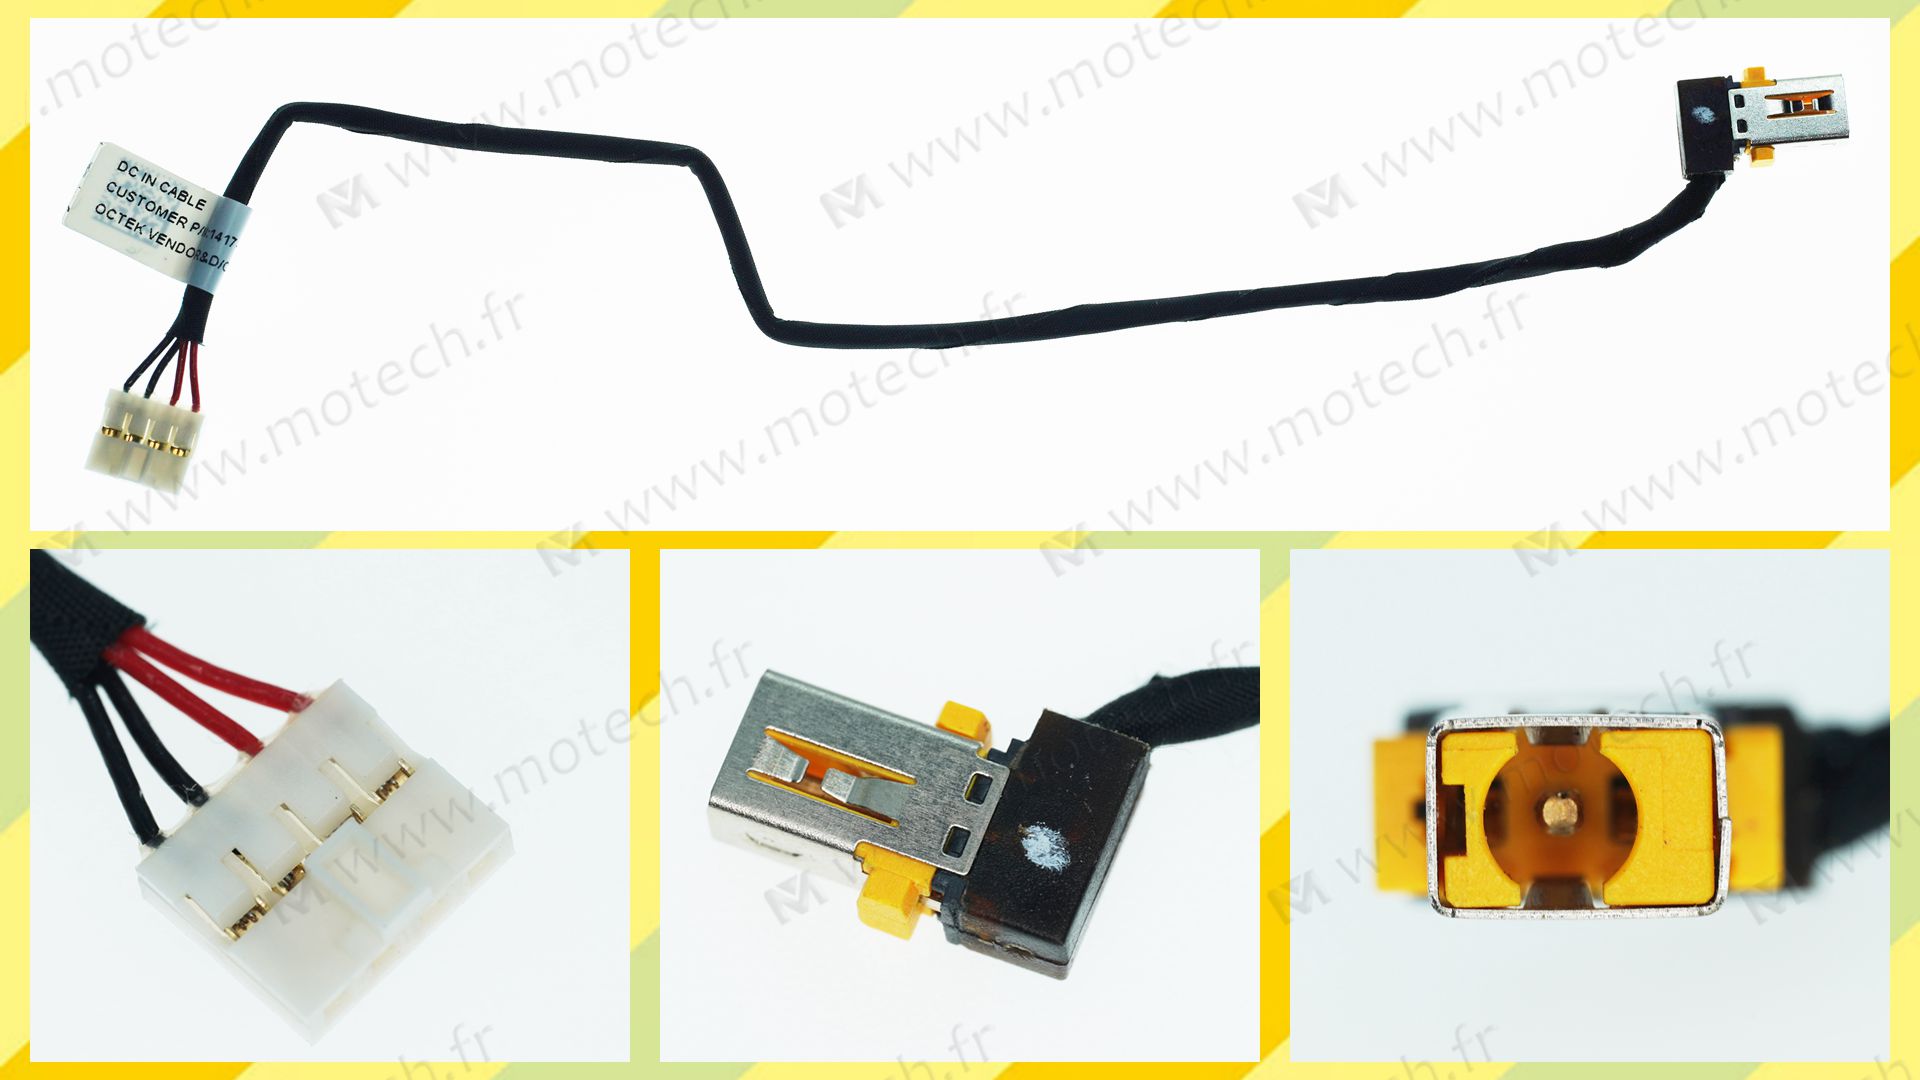 Acer TMP214-51 DC Jack, DC IN Câble Acer TMP214-51, Acer TMP214-51 Jack alimentation, Acer TMP214-51 Power Jack, Acer TMP214-51 Prise Connecteur, Acer TMP214-51 Connecteur alimentation, Acer TMP214-51 connecteur de charge, 